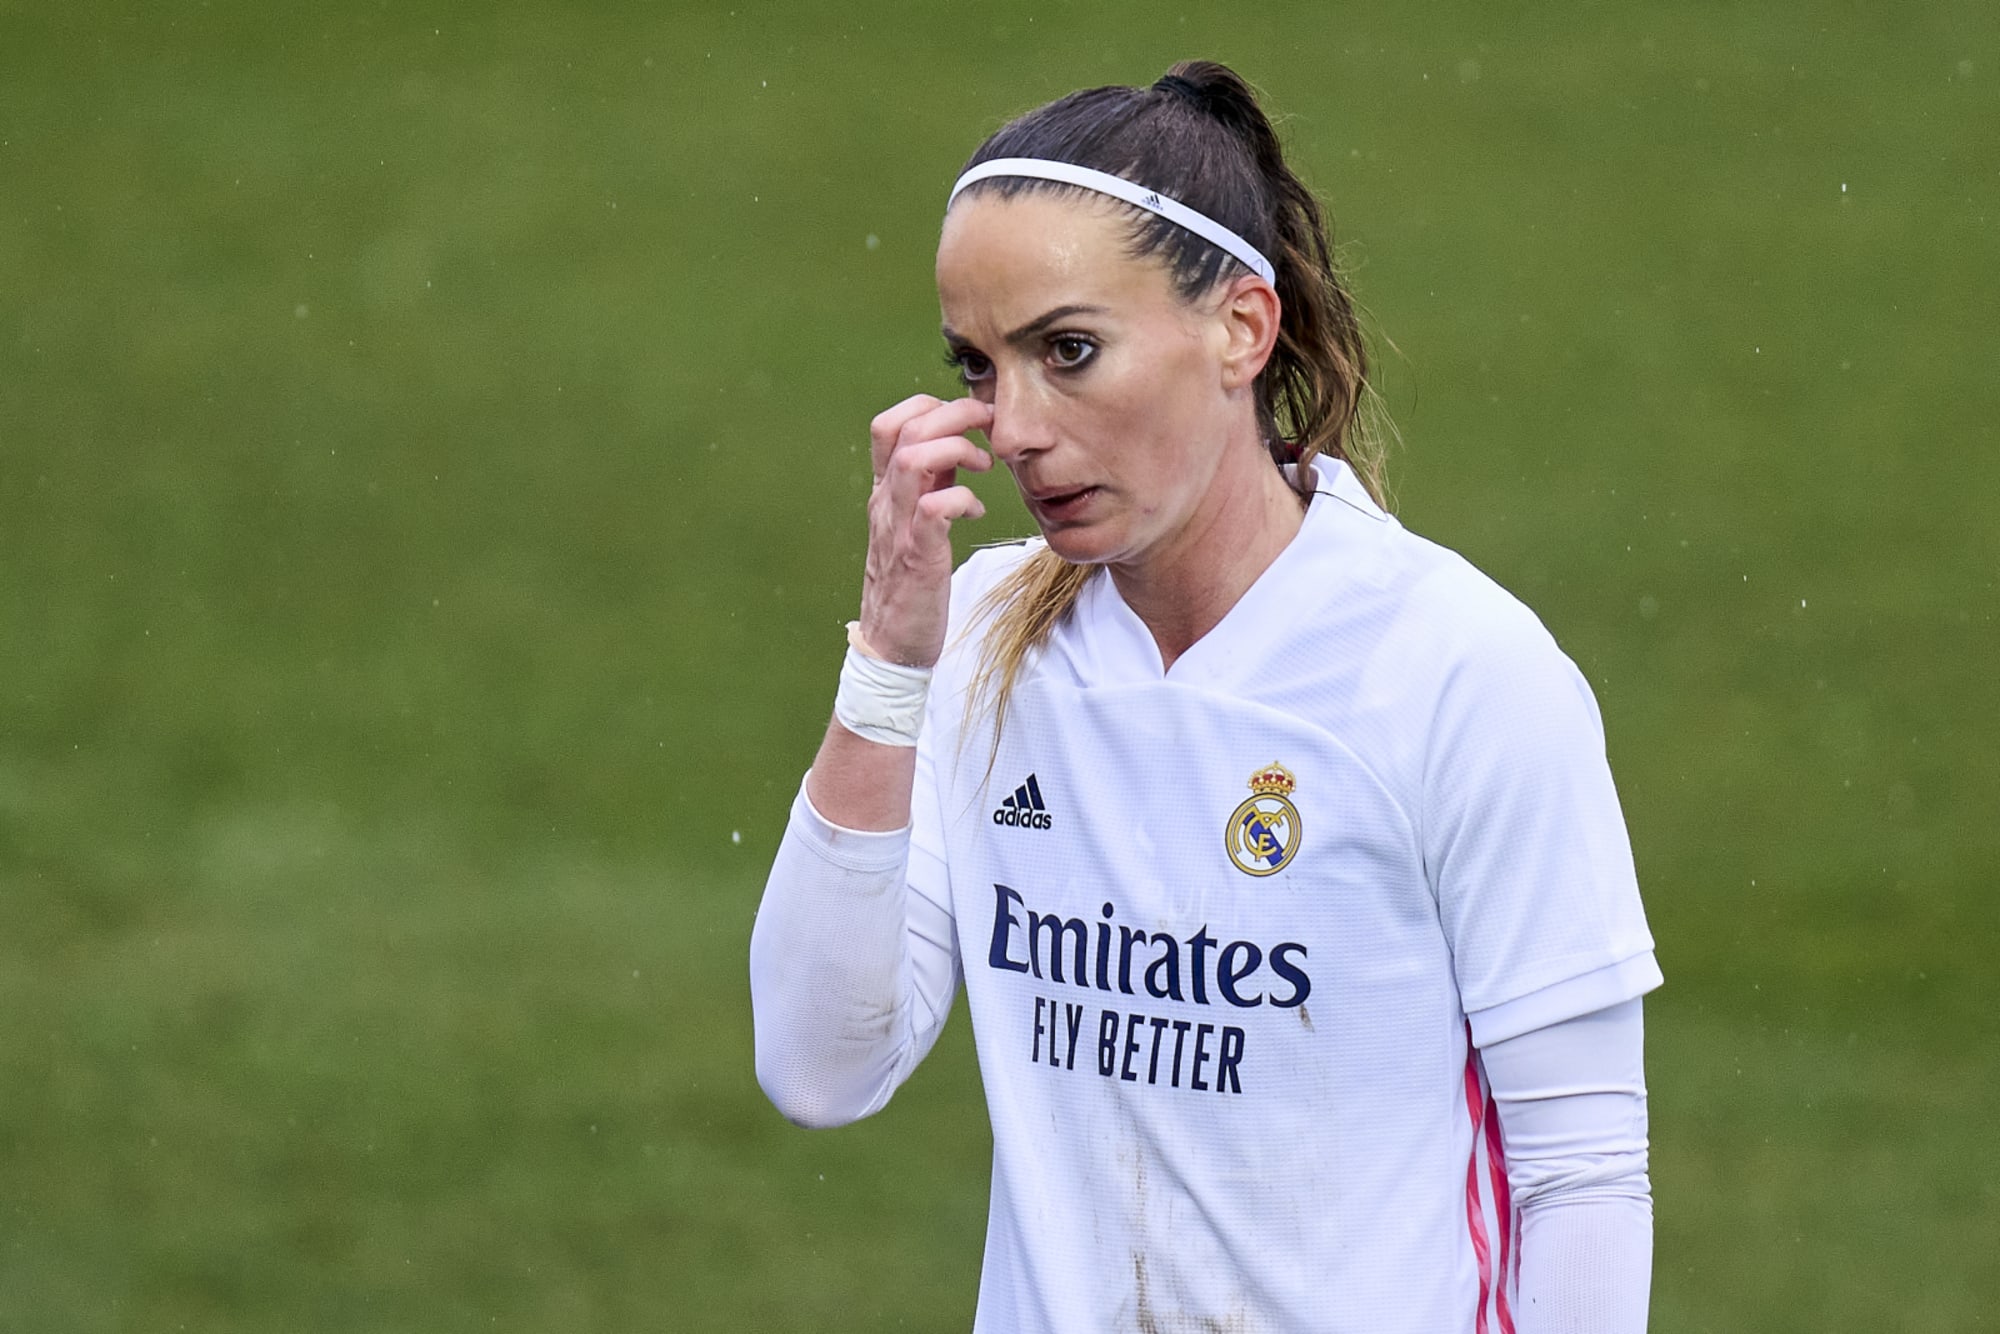 Real Madrid: Could Kosovare Asllani be headed to Juventus in swap?